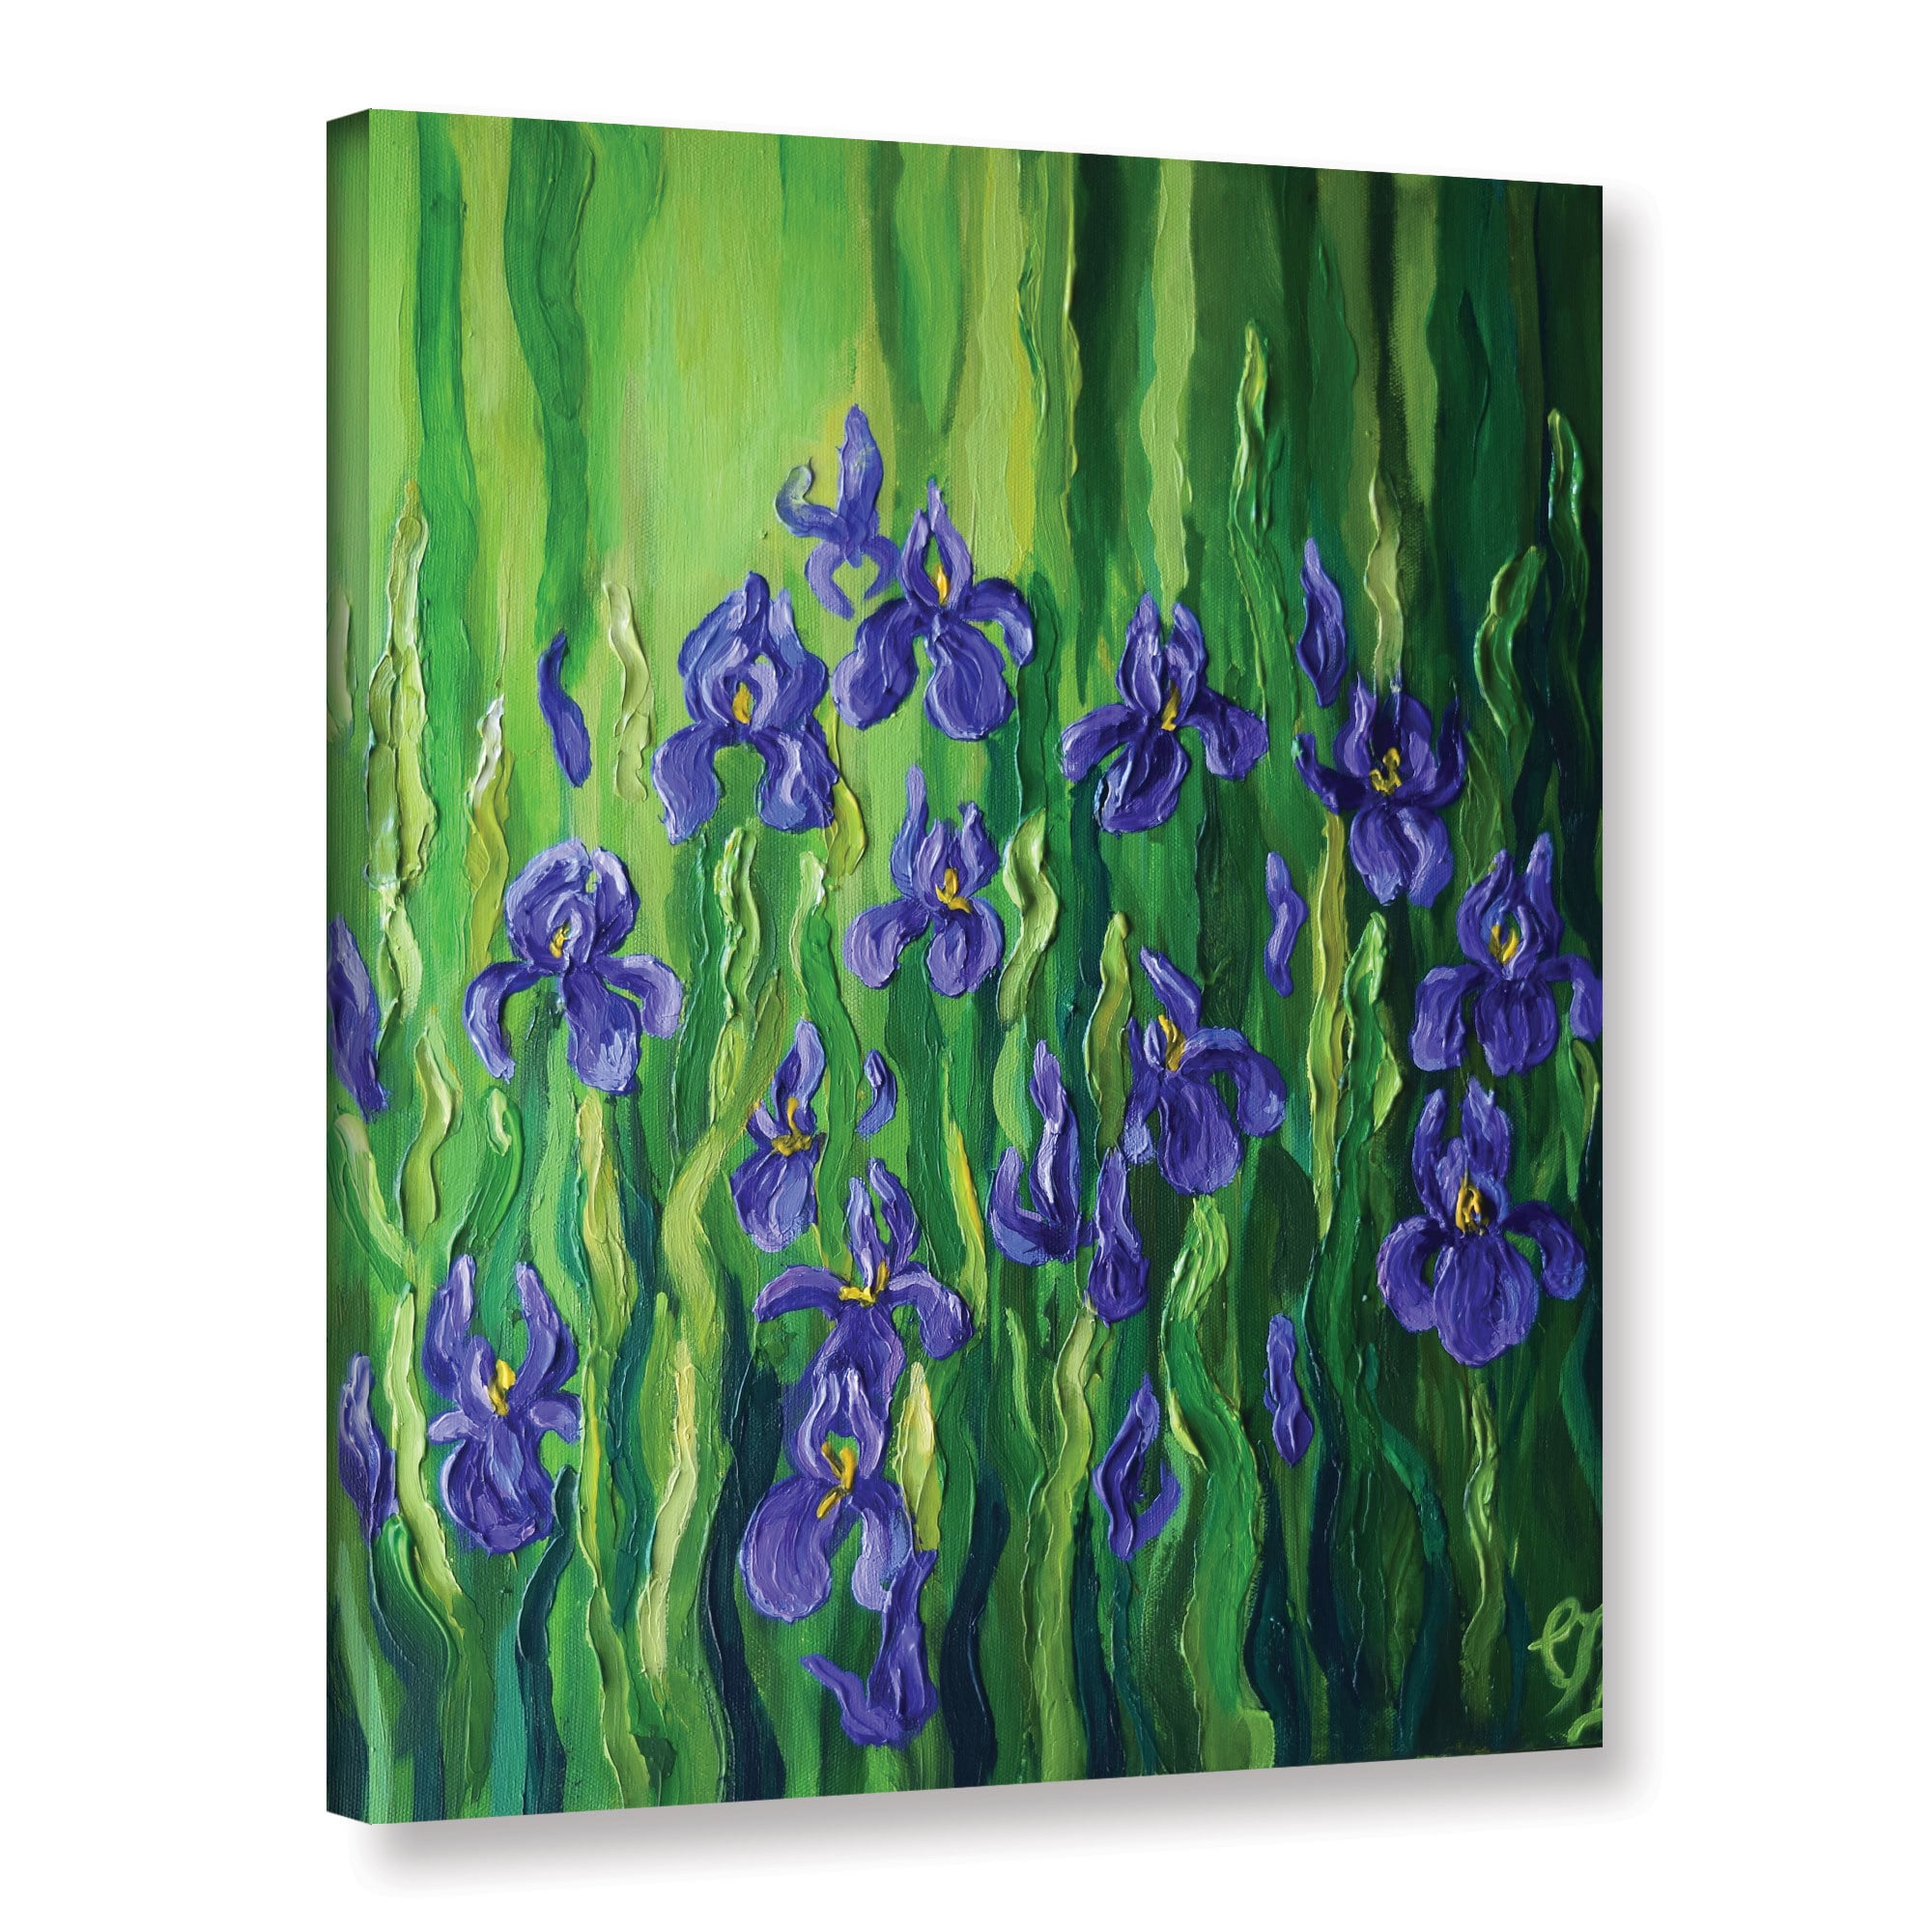 Colette Baumback's 'Irises' Gallery Wrapped Canvas